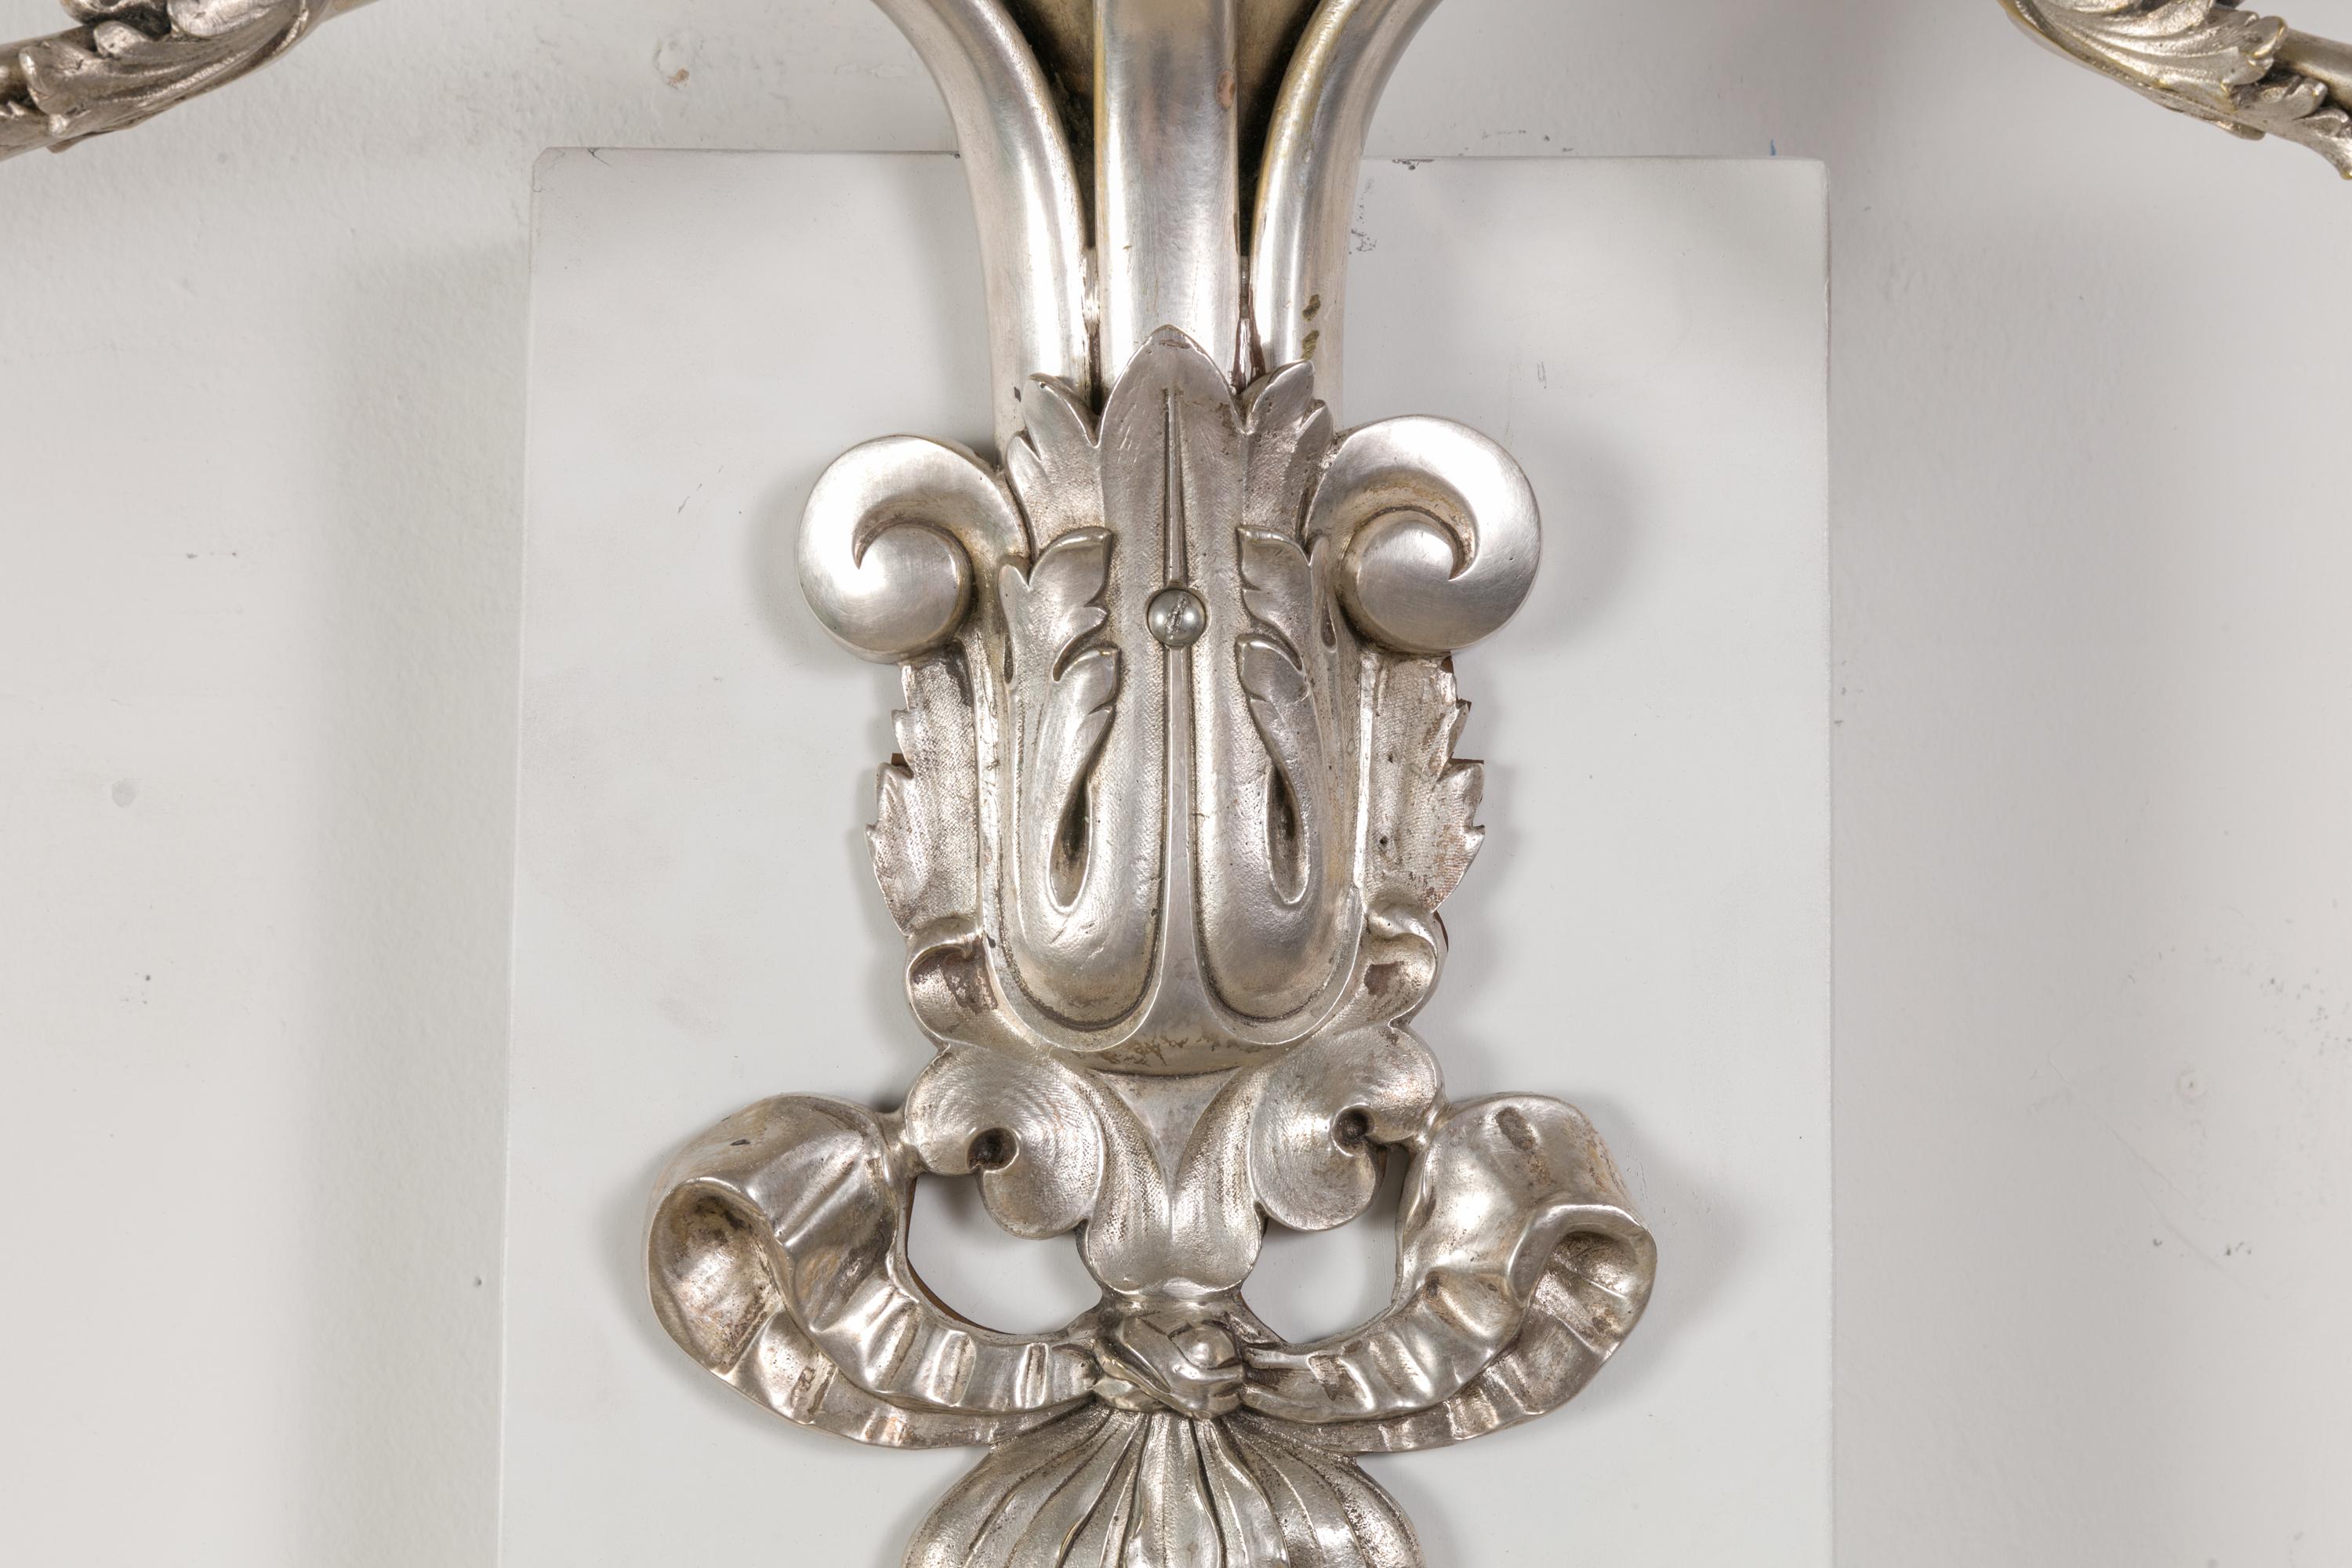 20th Century Edward F Caldwell & Co. Silvered Bronze Neoclassical Revival Sconces, USA 1900s For Sale